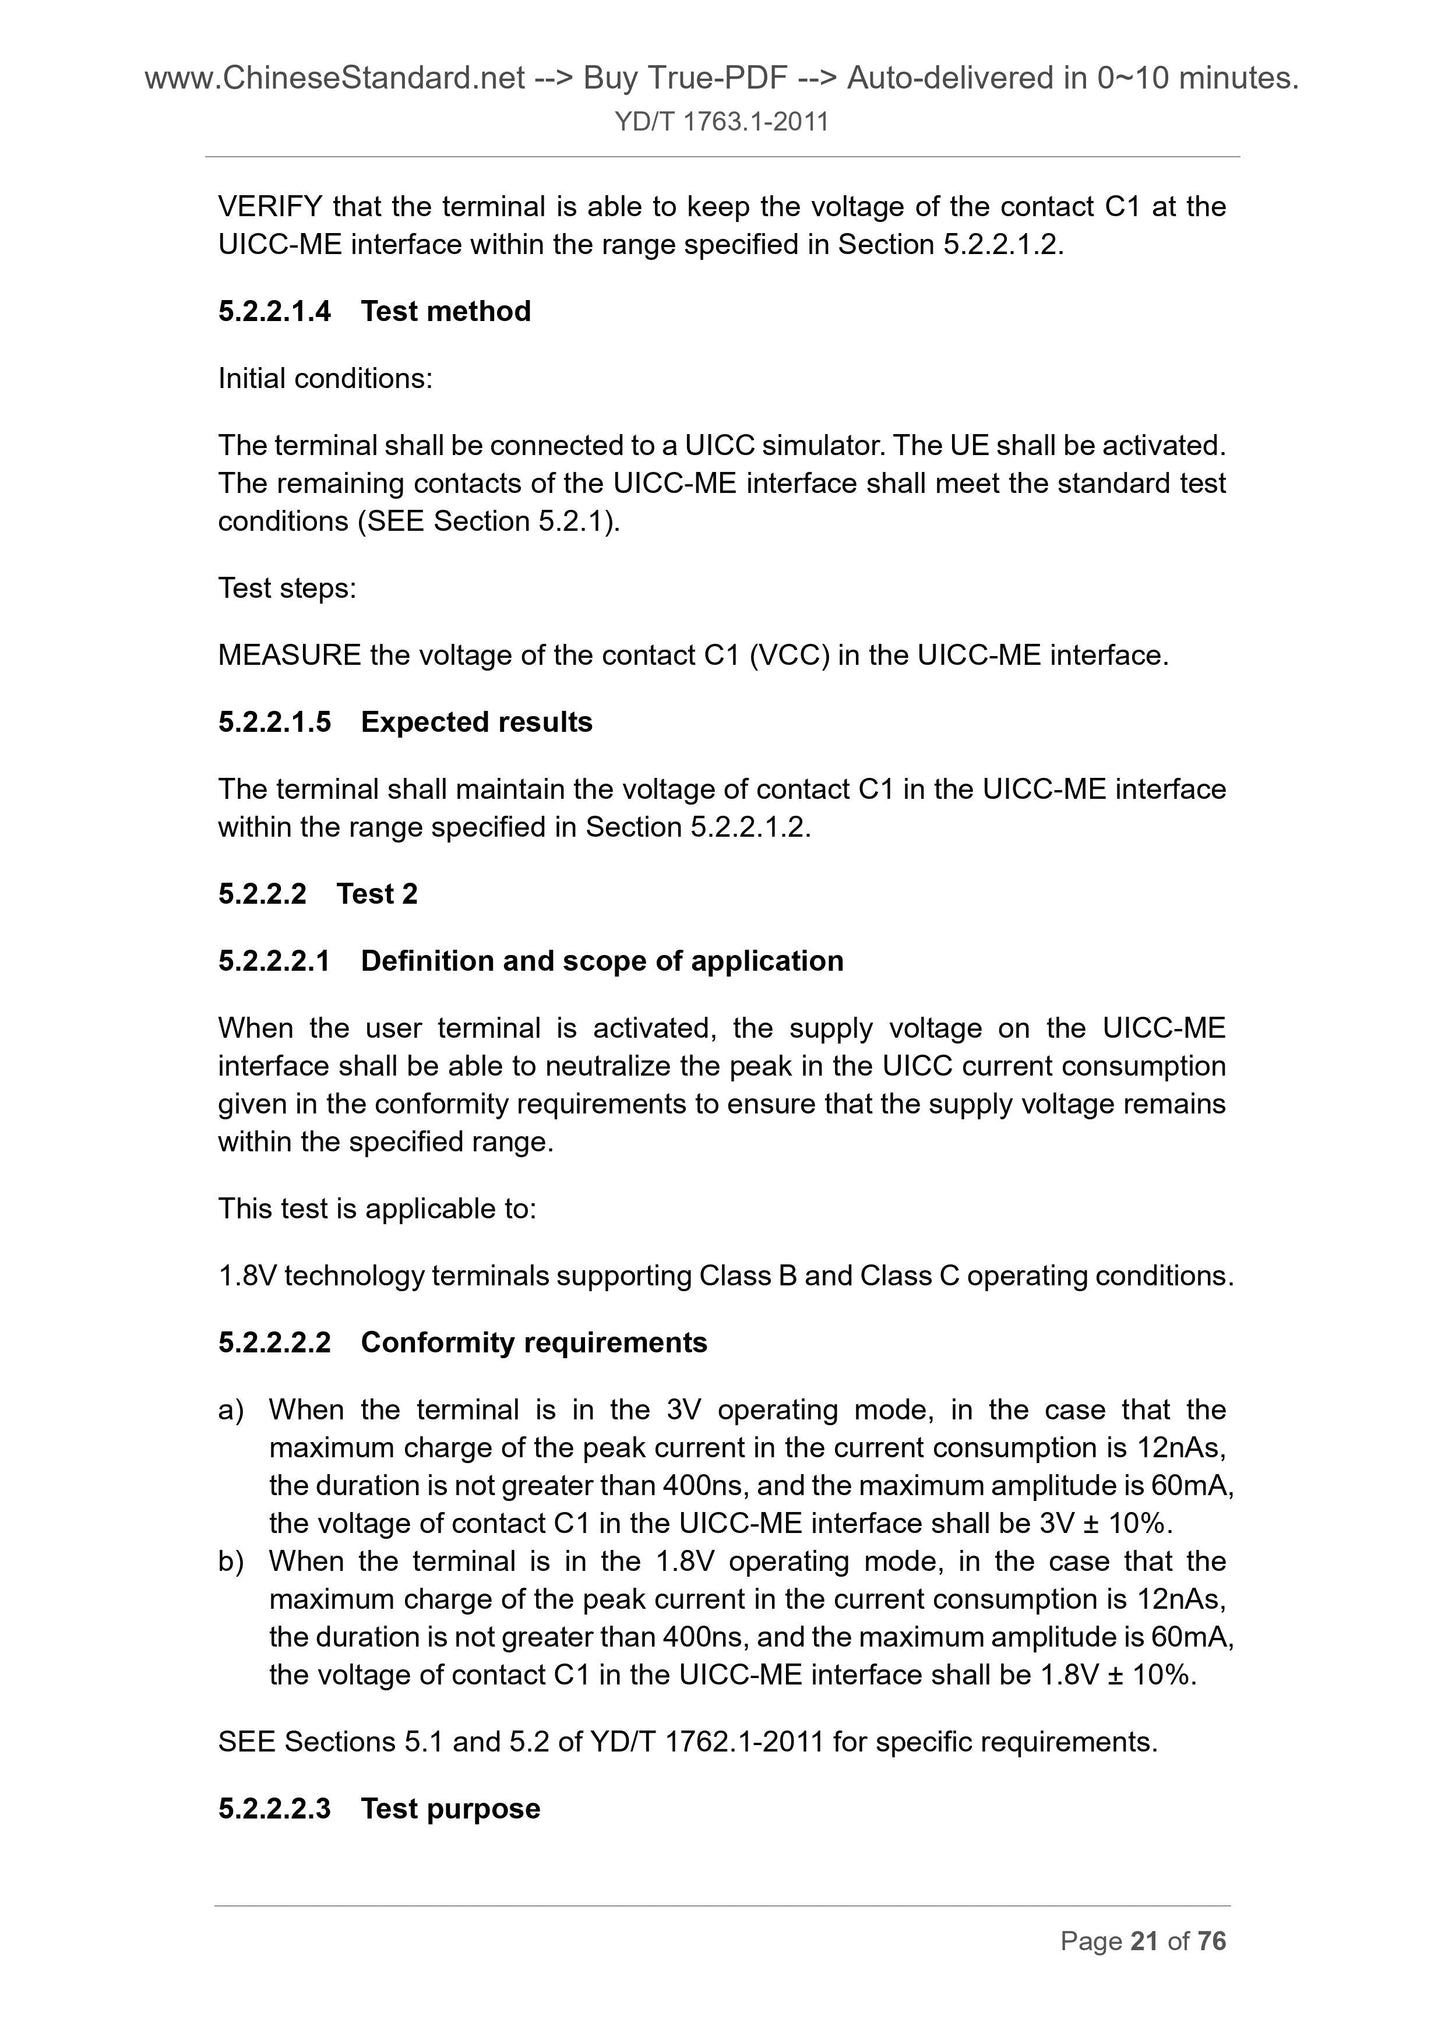 YD/T 1763.1-2011 Page 11